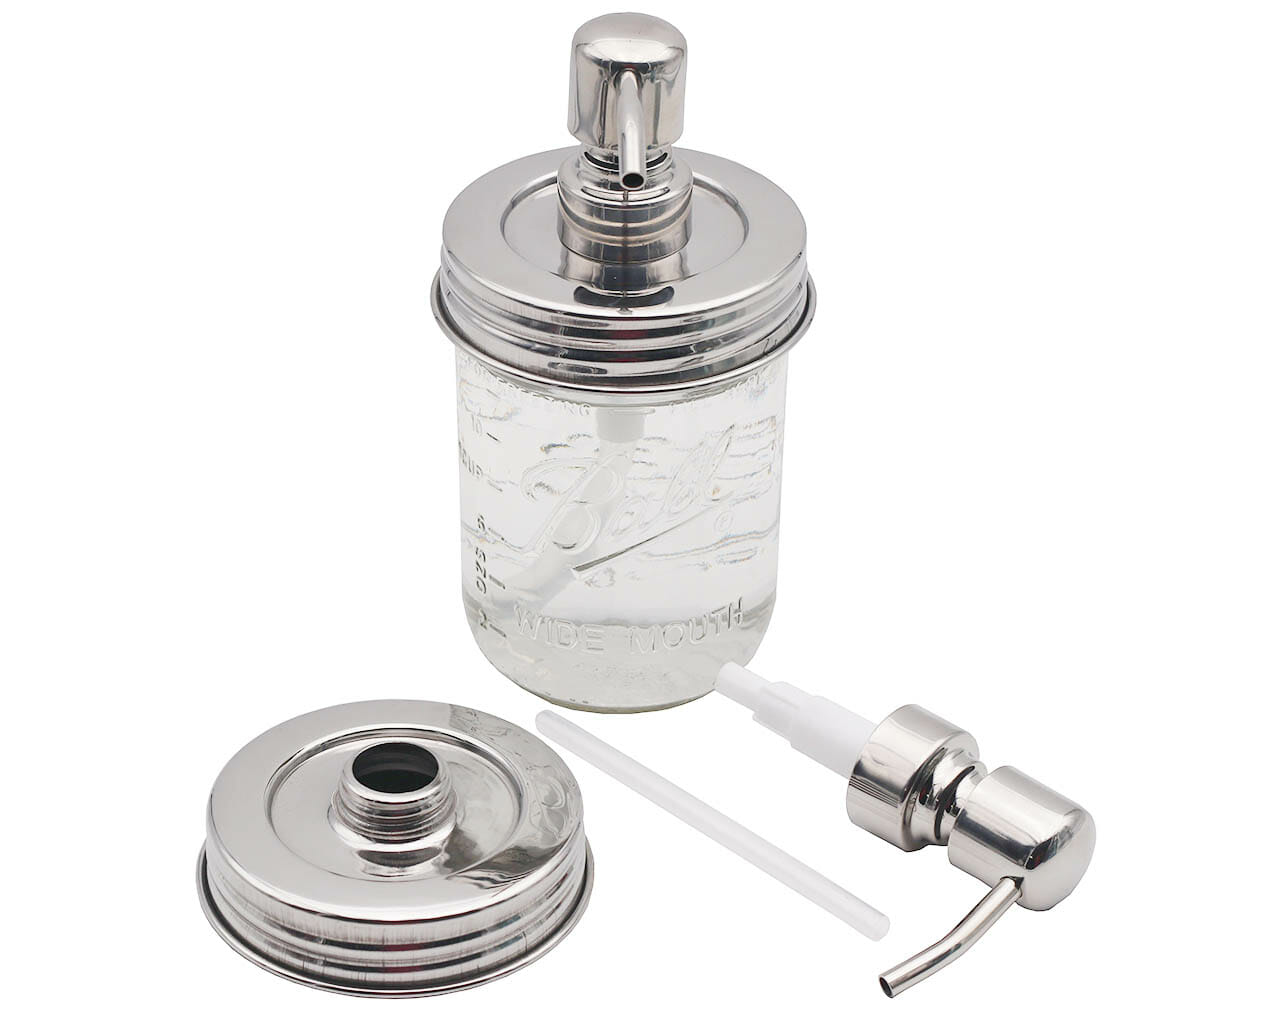 Threaded Mirror Chrome Soap Dispenser Lid for Wide Mouth Mason Jars Style #4